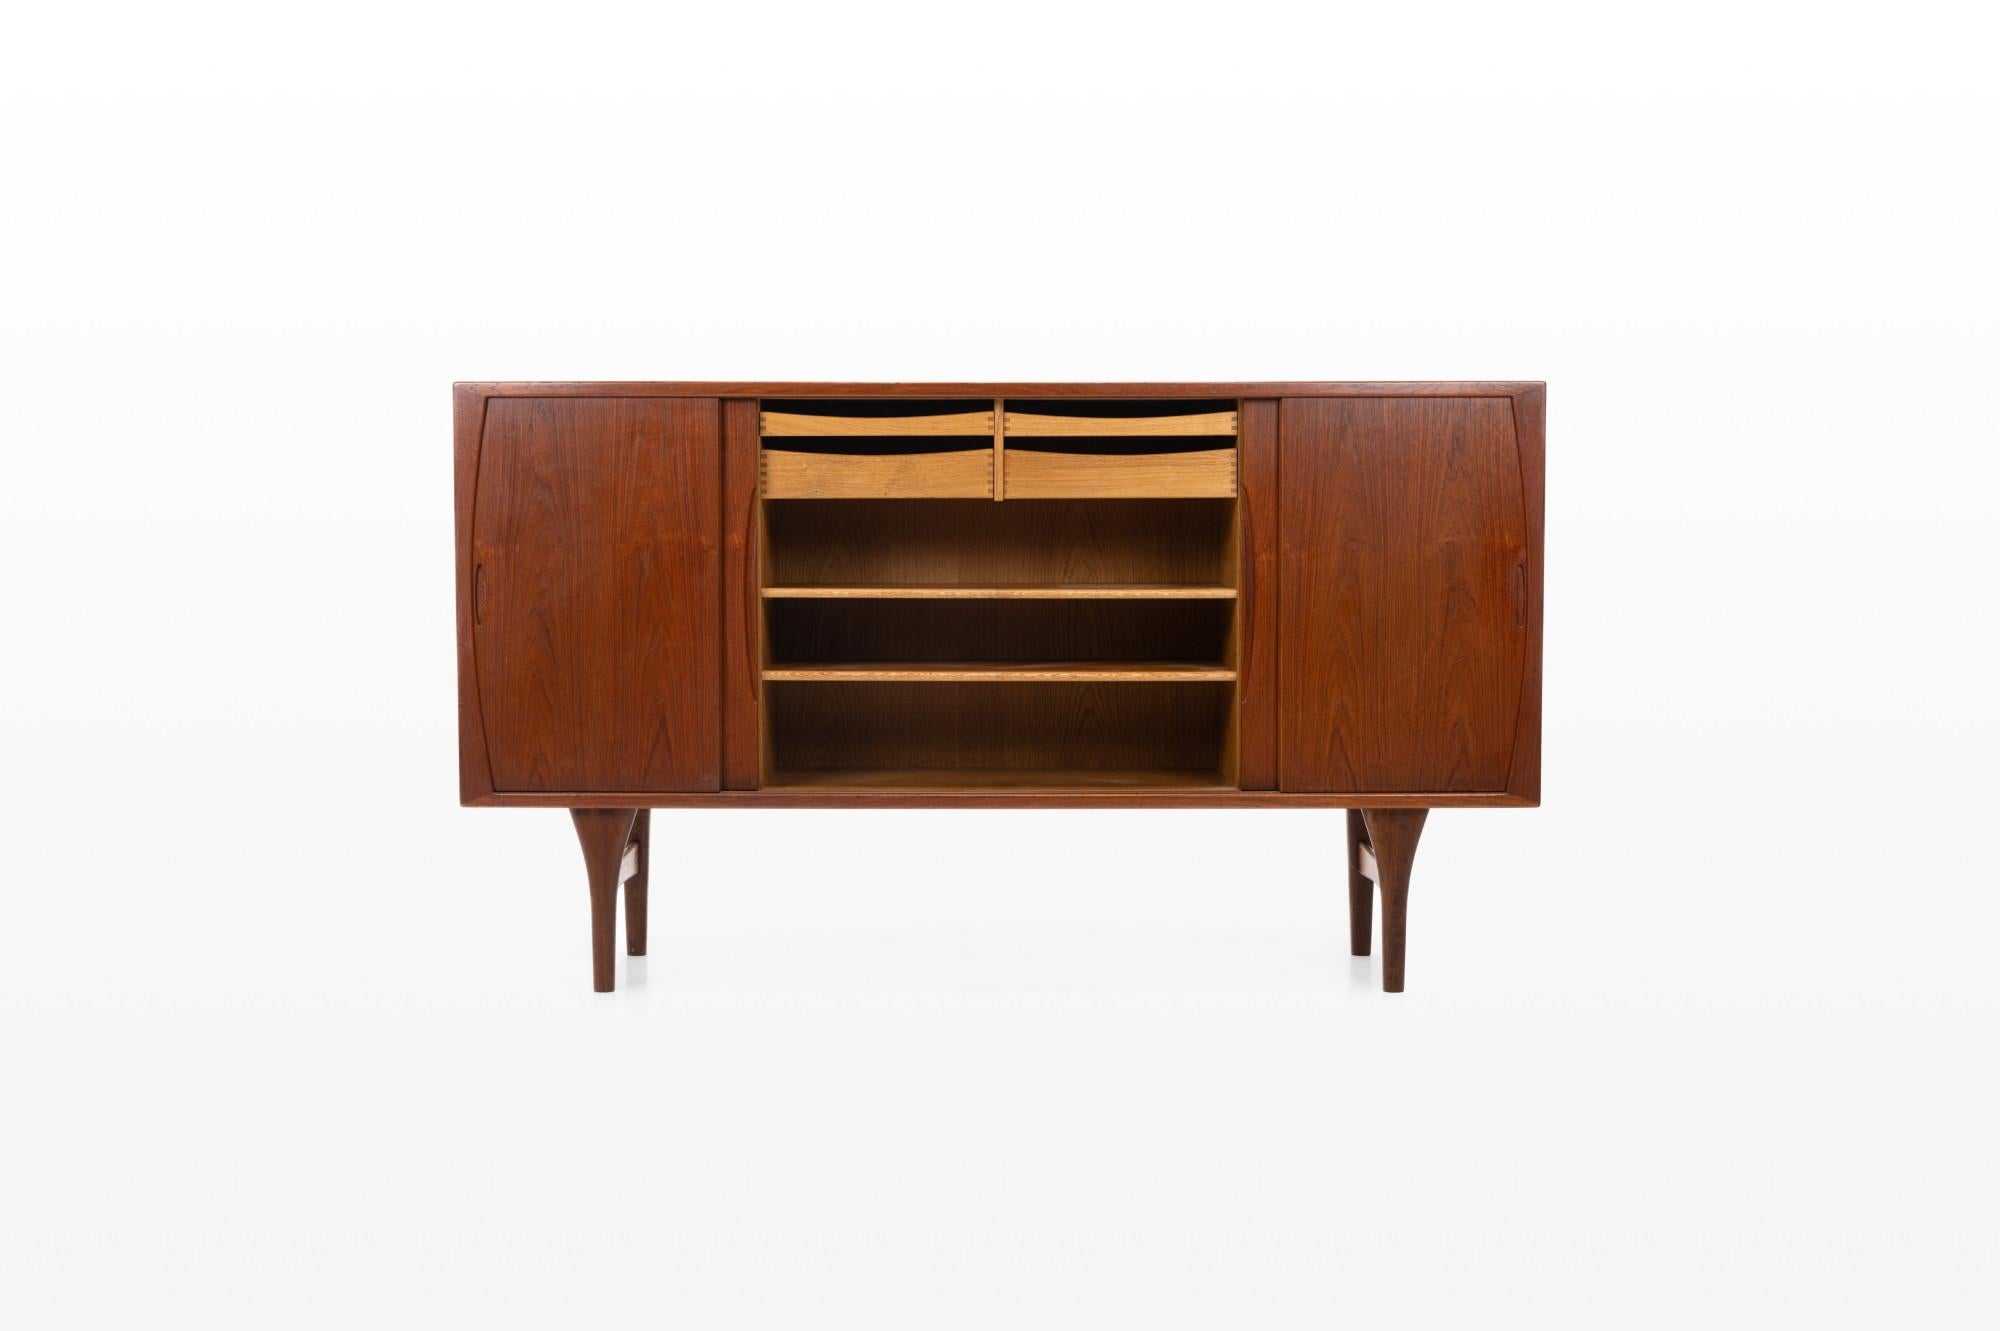 Beautiful sideboard designed by Henning Kjærnulf for Bruno Hansen. It has been produced in the 1960s in Denmark. This sideboard is finished in teak on the outside and oak on the inside, very high quality.

Dimensions:
W: 200 cm
D: 44 cm
H: 114 cm